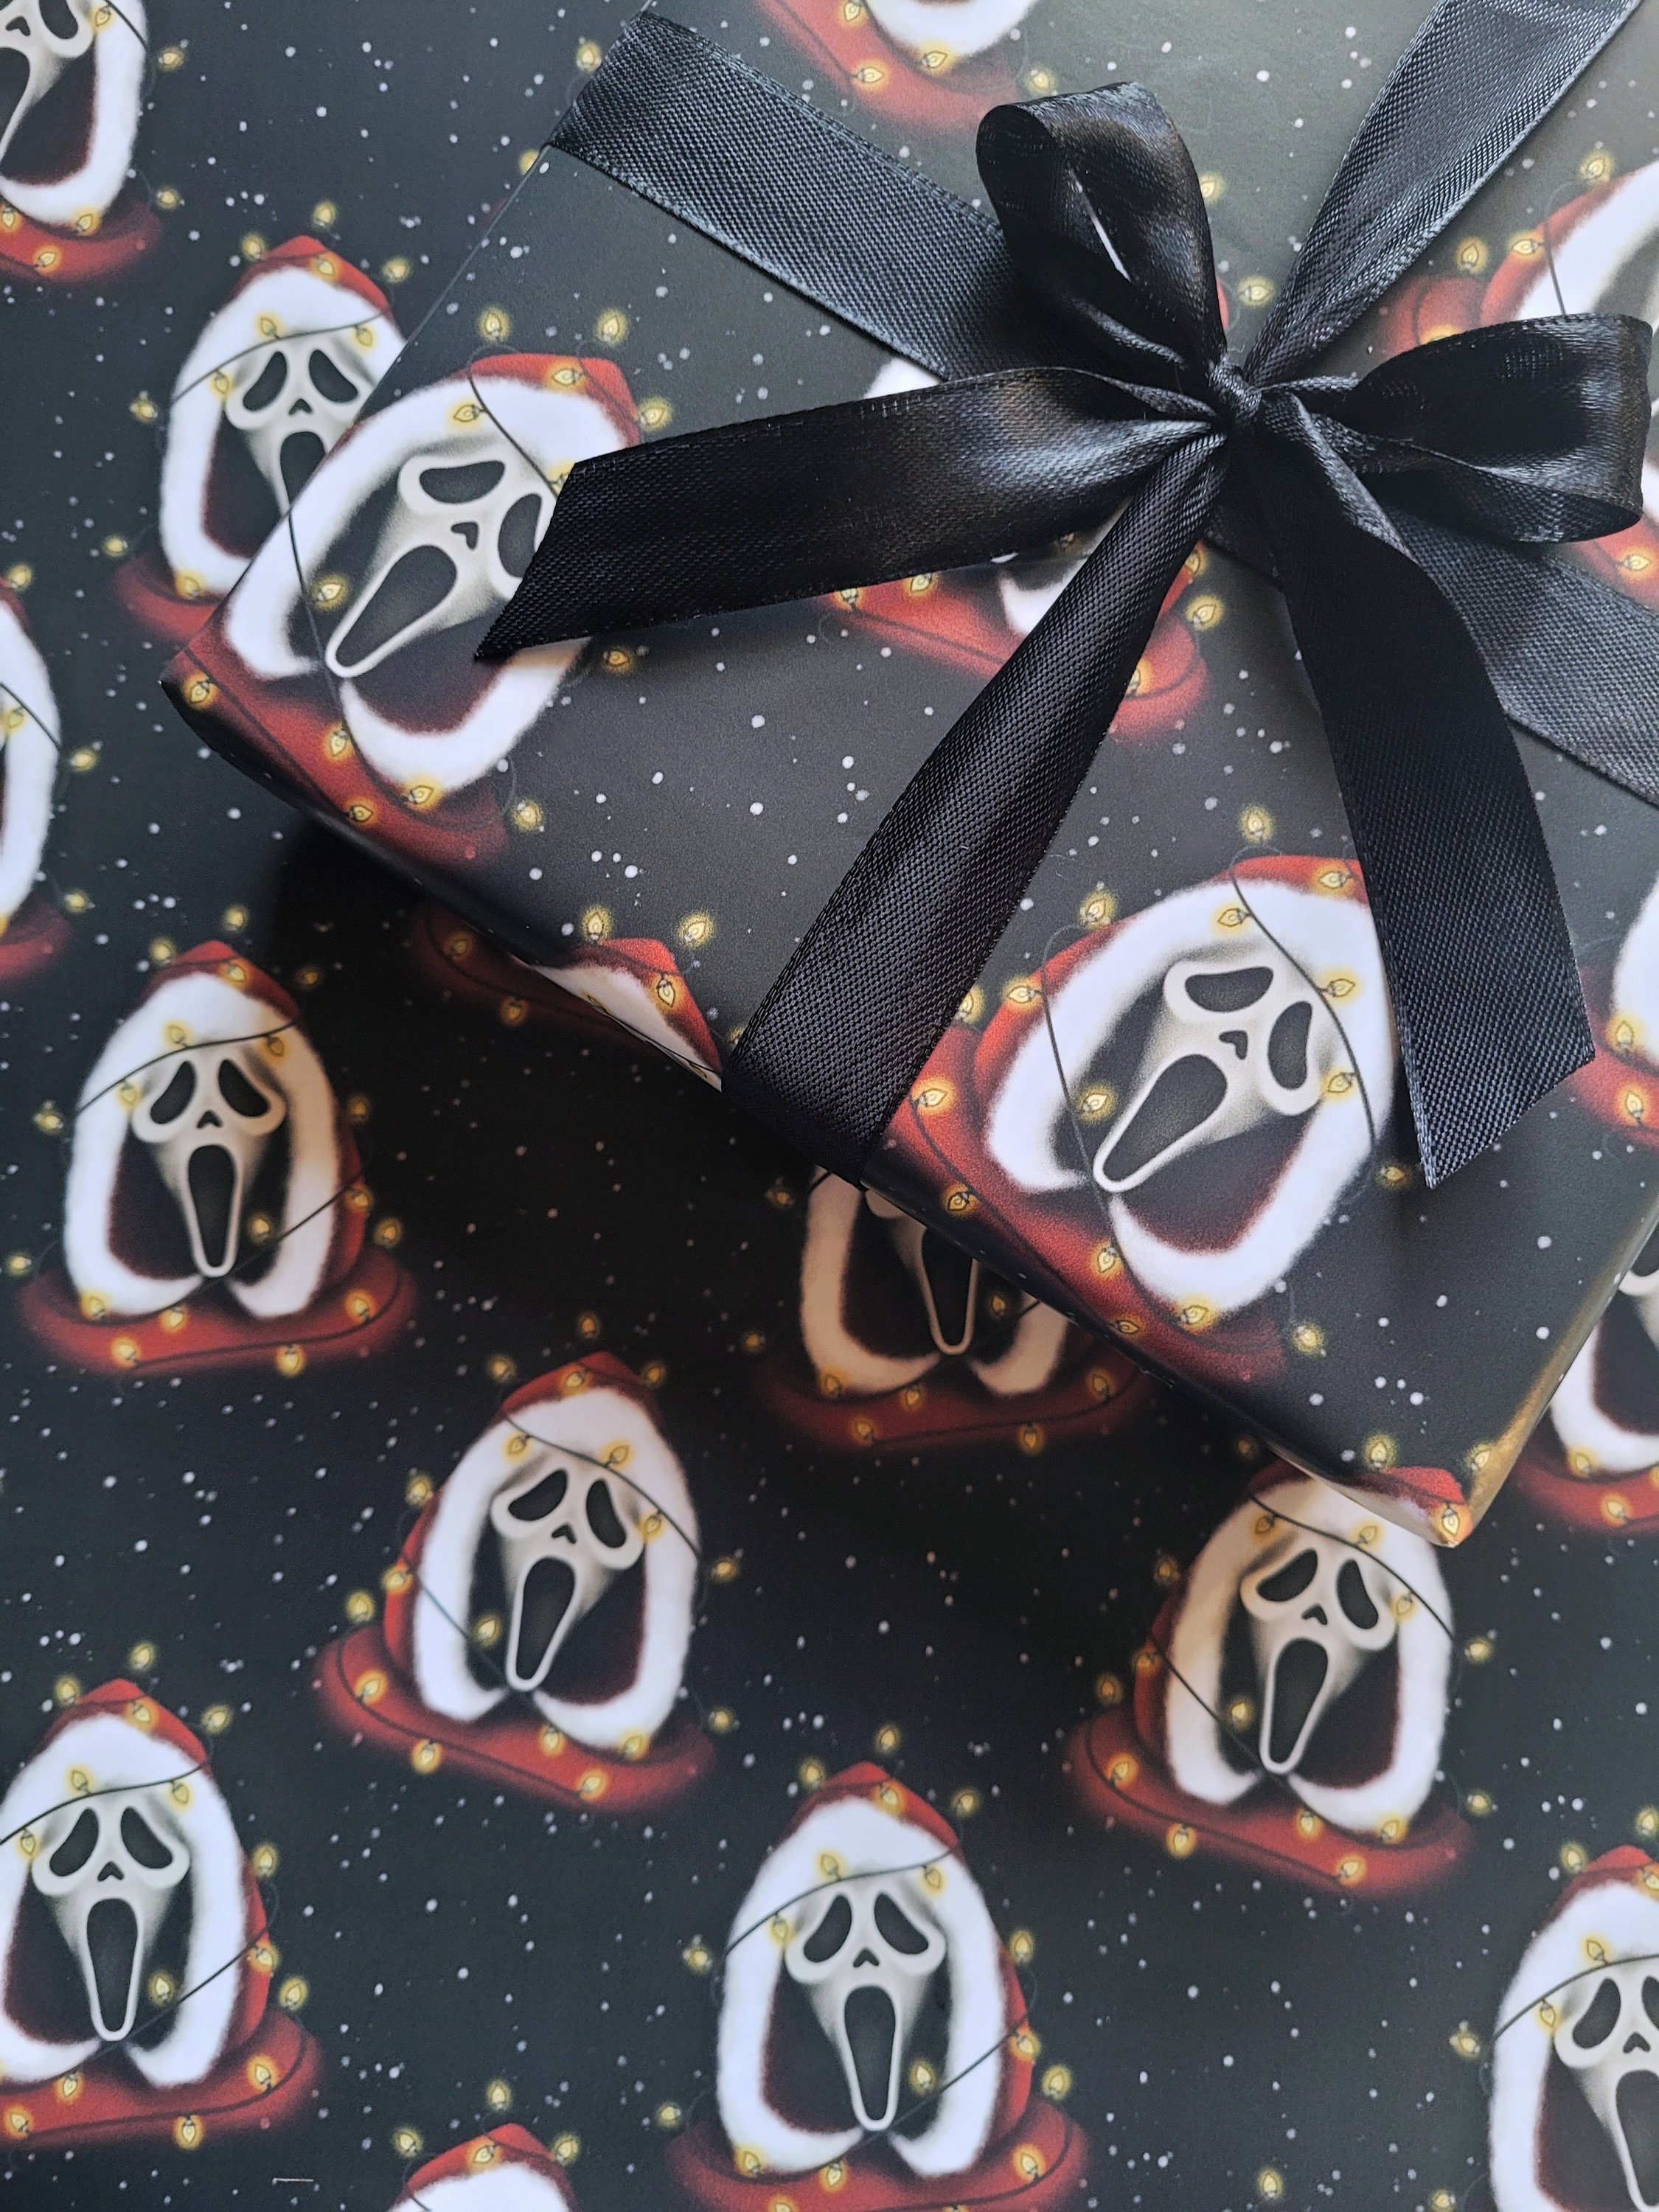 Spooky Gift Wrap Pack, Black, White and Red Halloween Wrapping